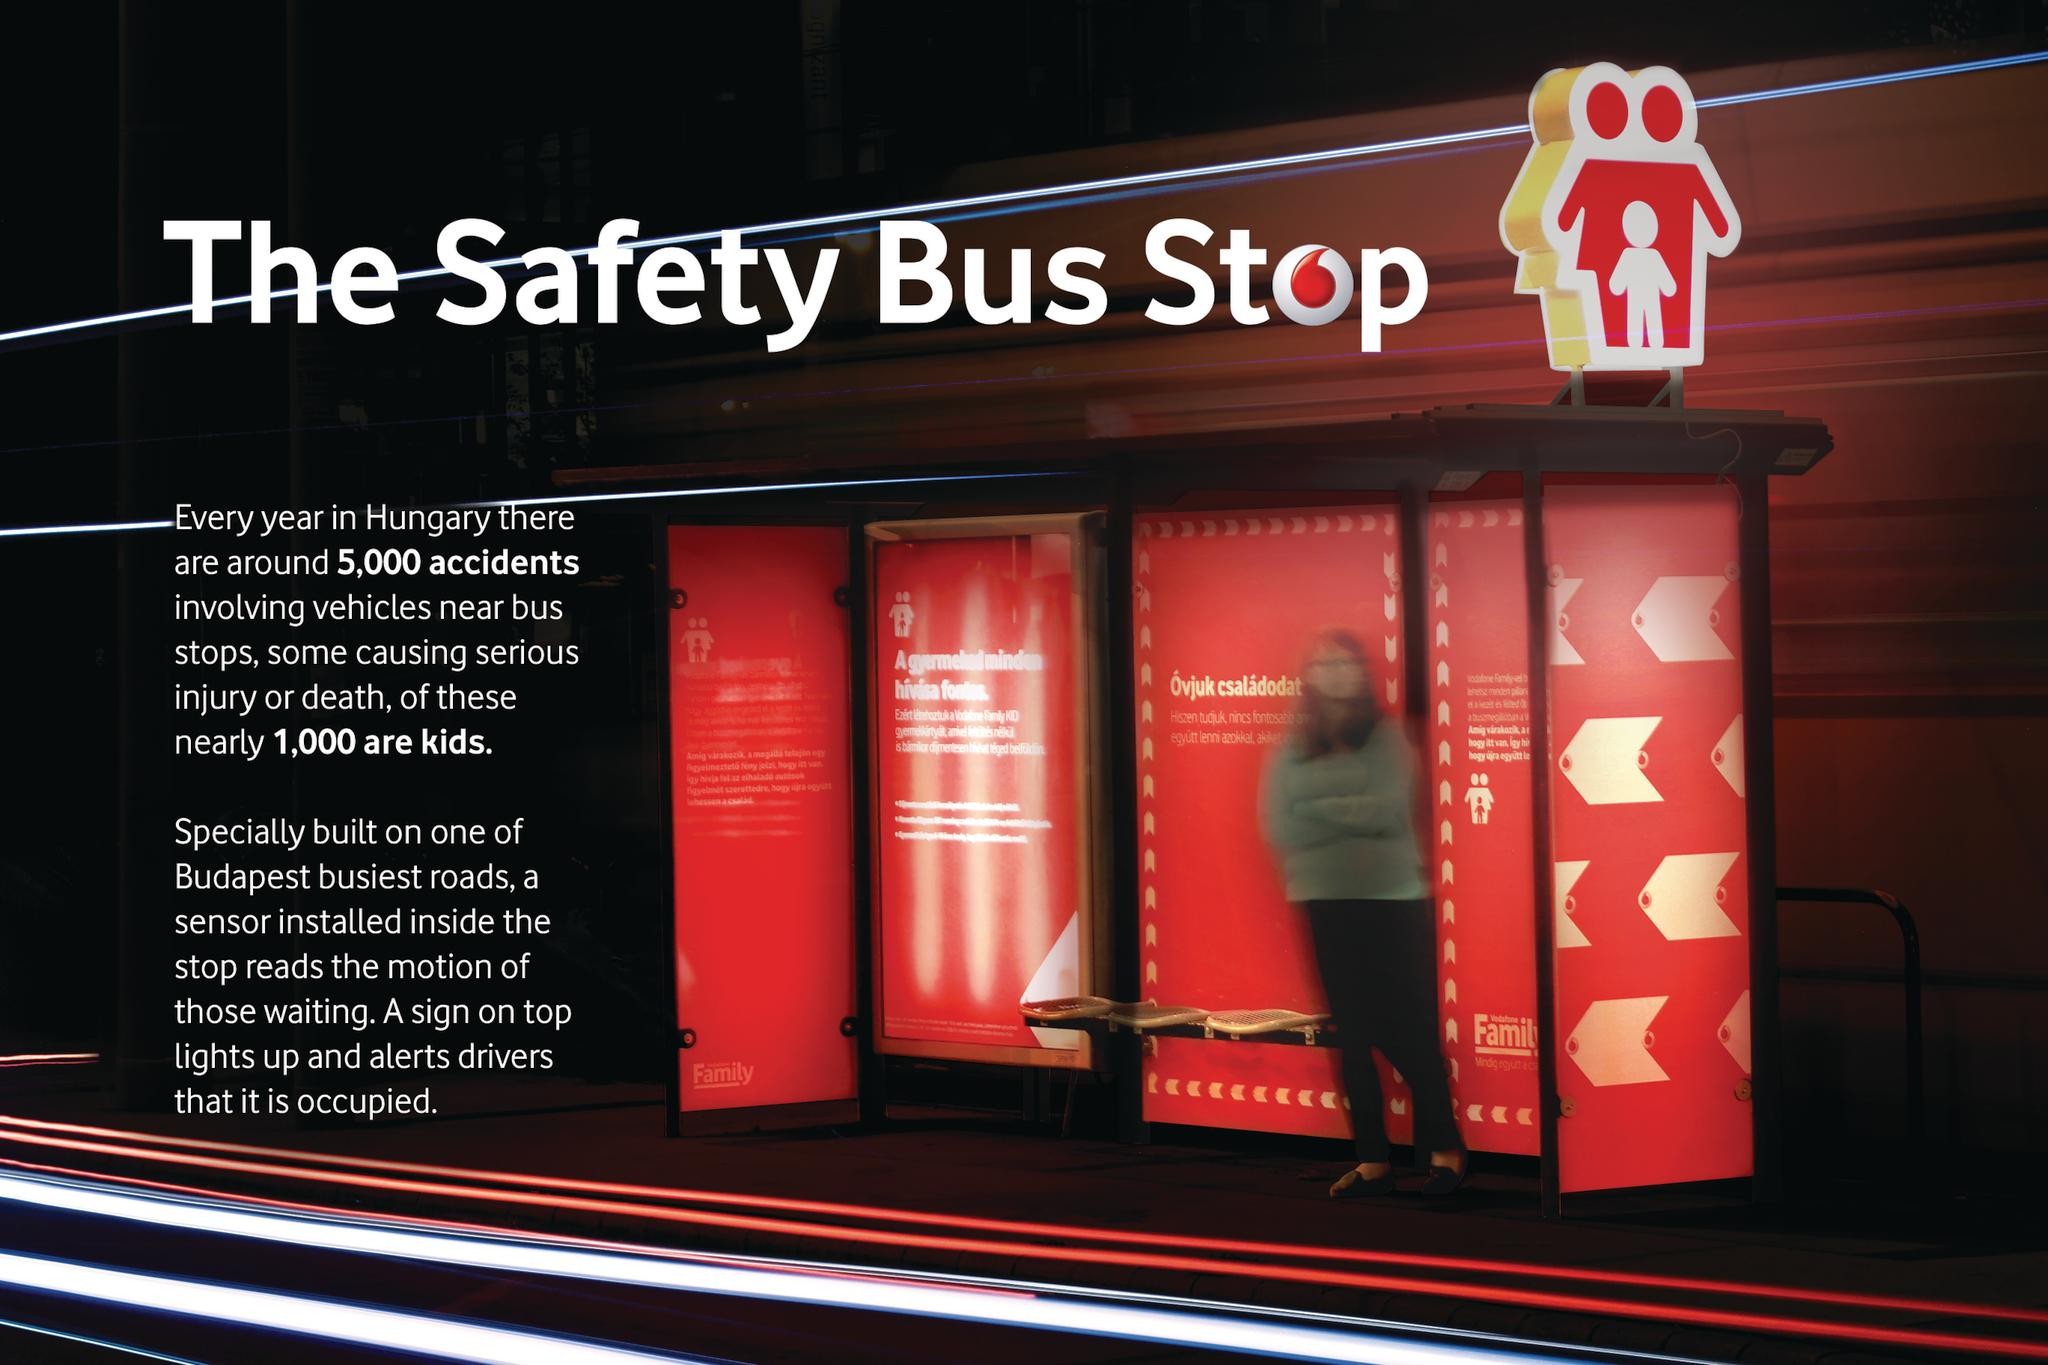 The Safety Bus Stop